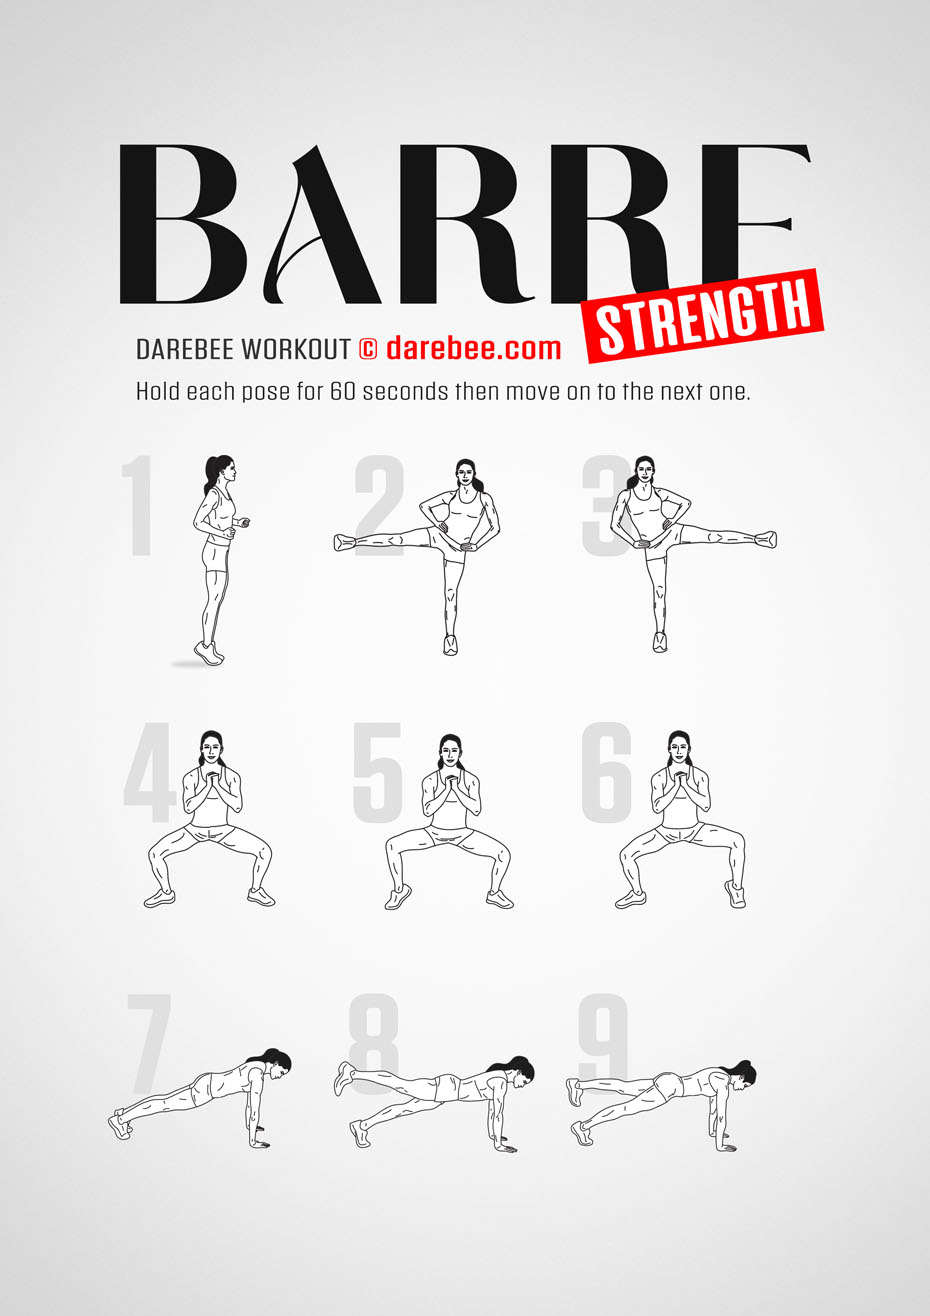 Barre is a Darebee home fitness, no-equipment lower-body strength workout designed to help you walk, run, kick and jump better. 